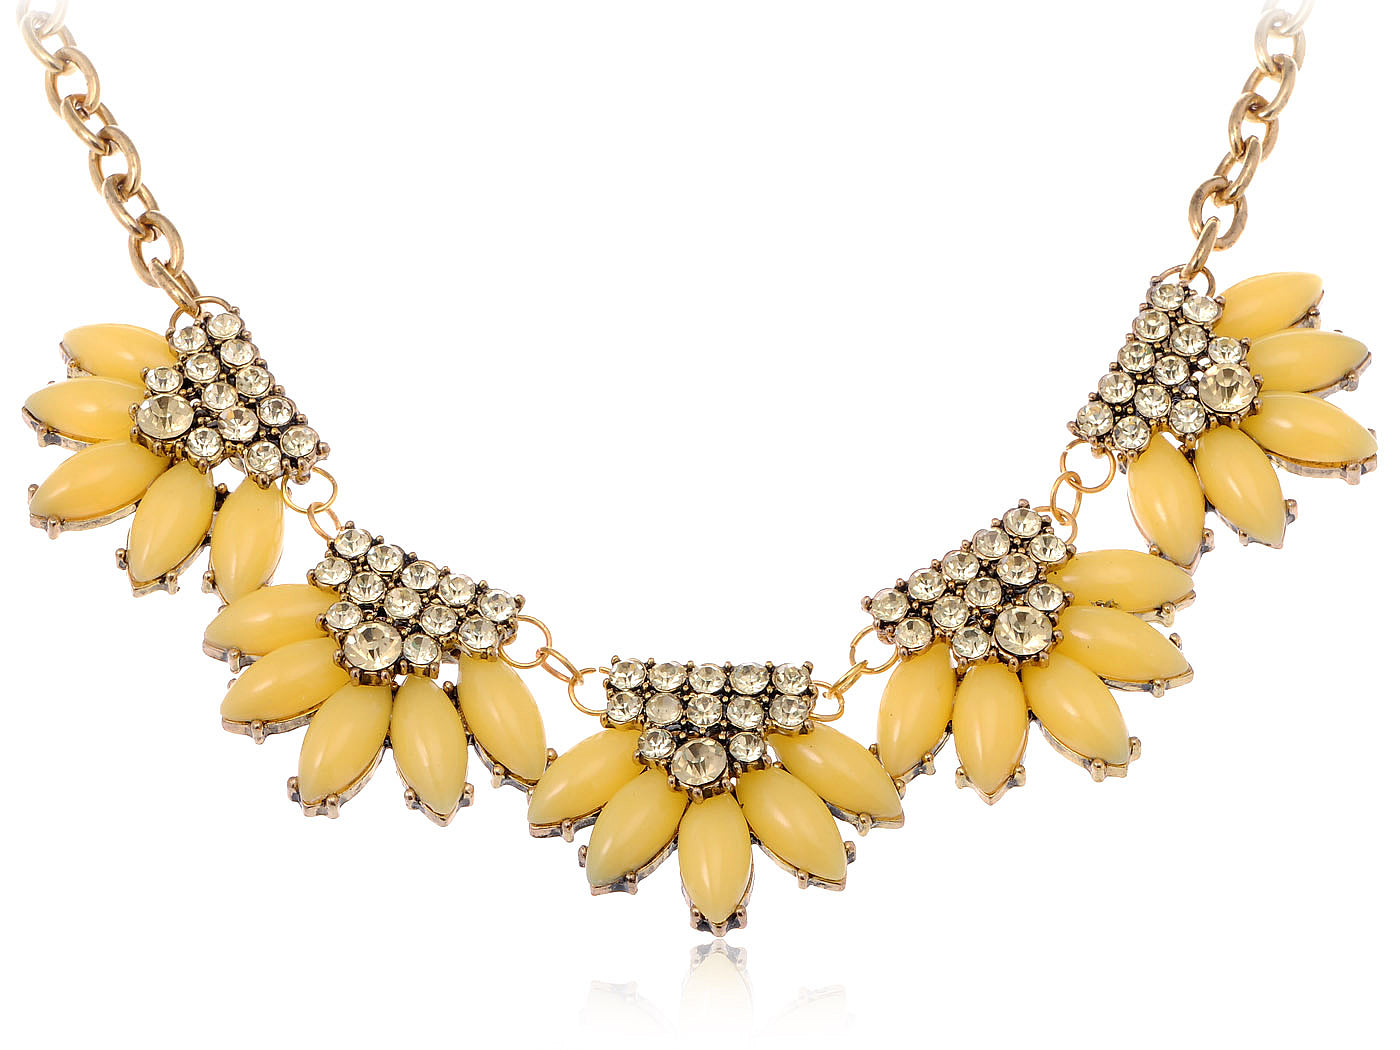 And Sunshine Yellow Beads Floral Collar Necklace